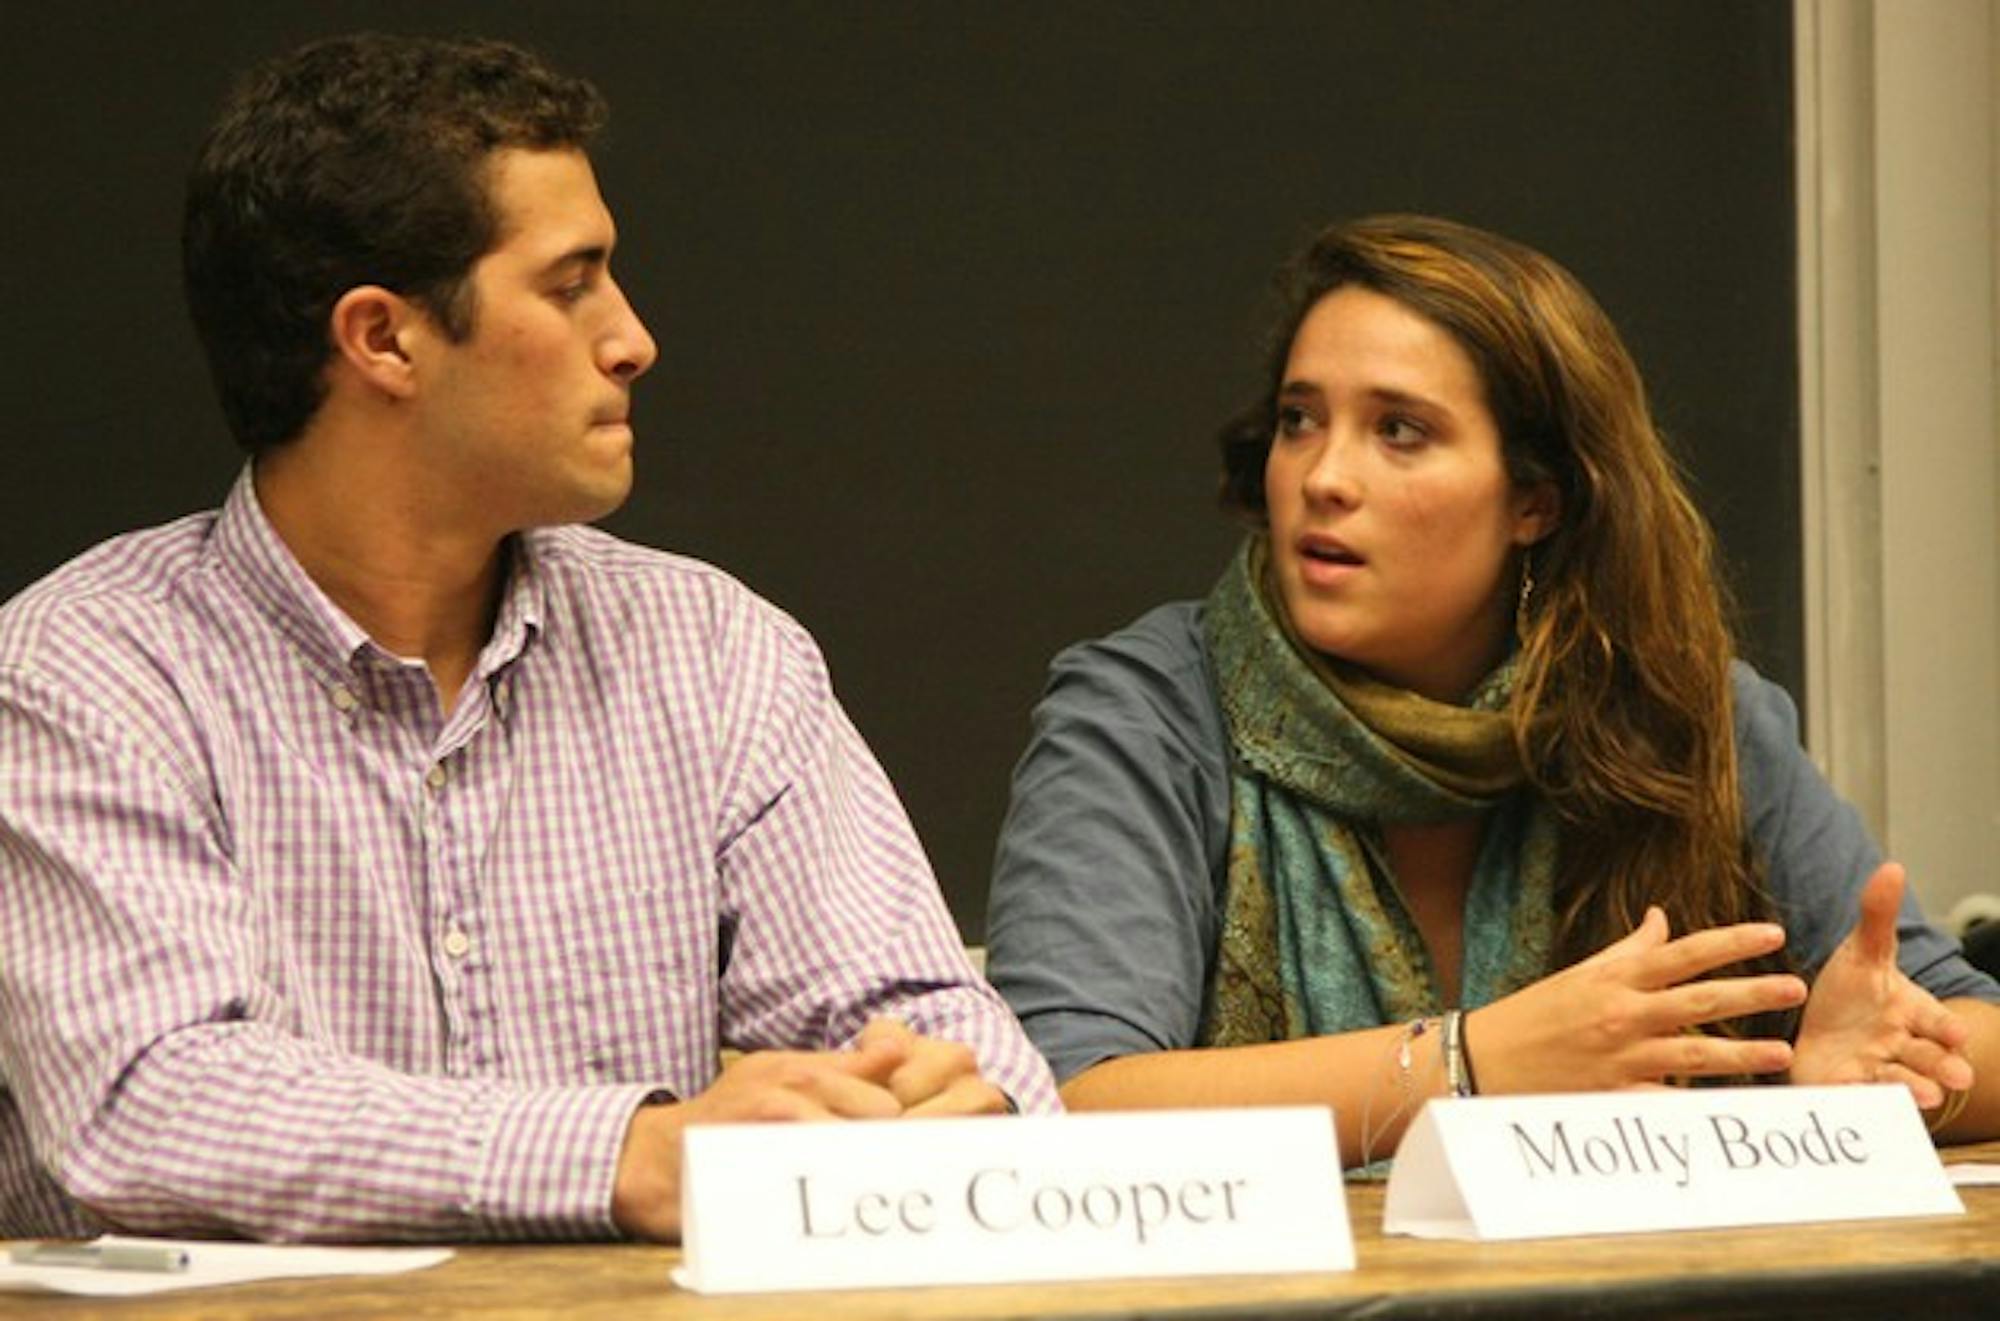 Student Assembly presidential candidates Lee Cooper '09 and Molly Bode '09 present their platforms at the Student Assembly's first candidate debate.